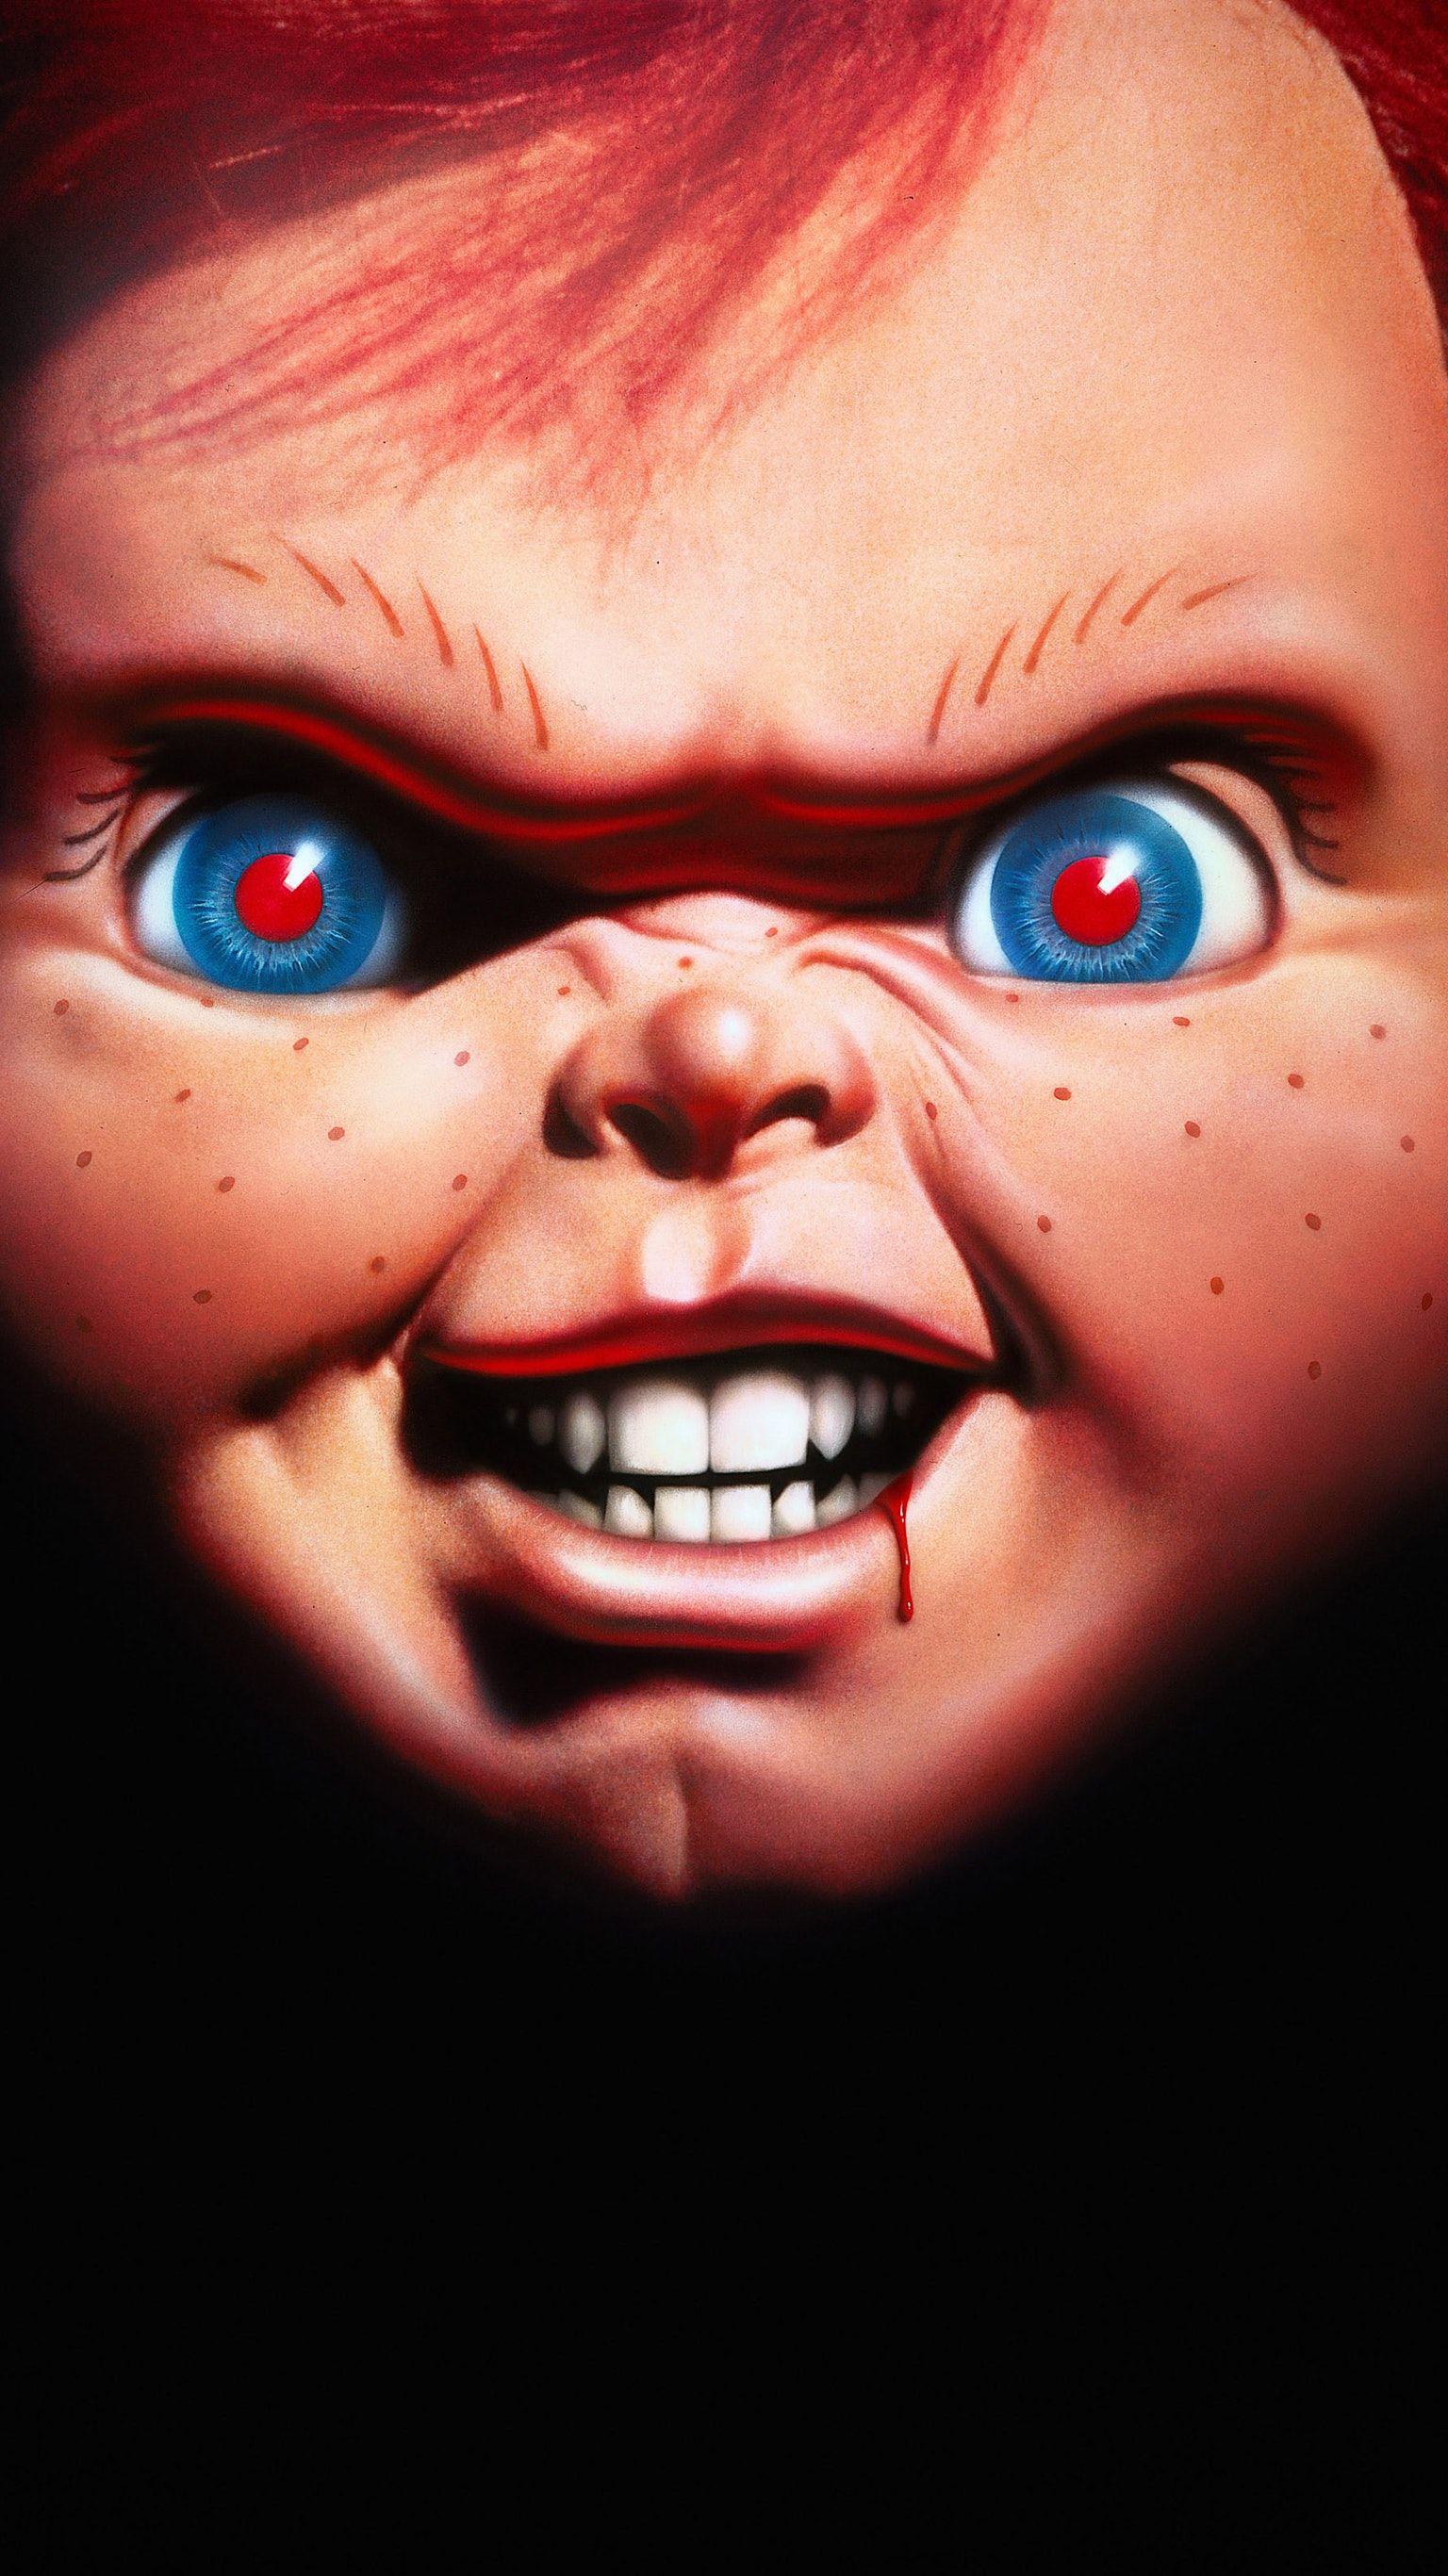 Child's Play 3 (1991) Phone Wallpaper. I love these movies